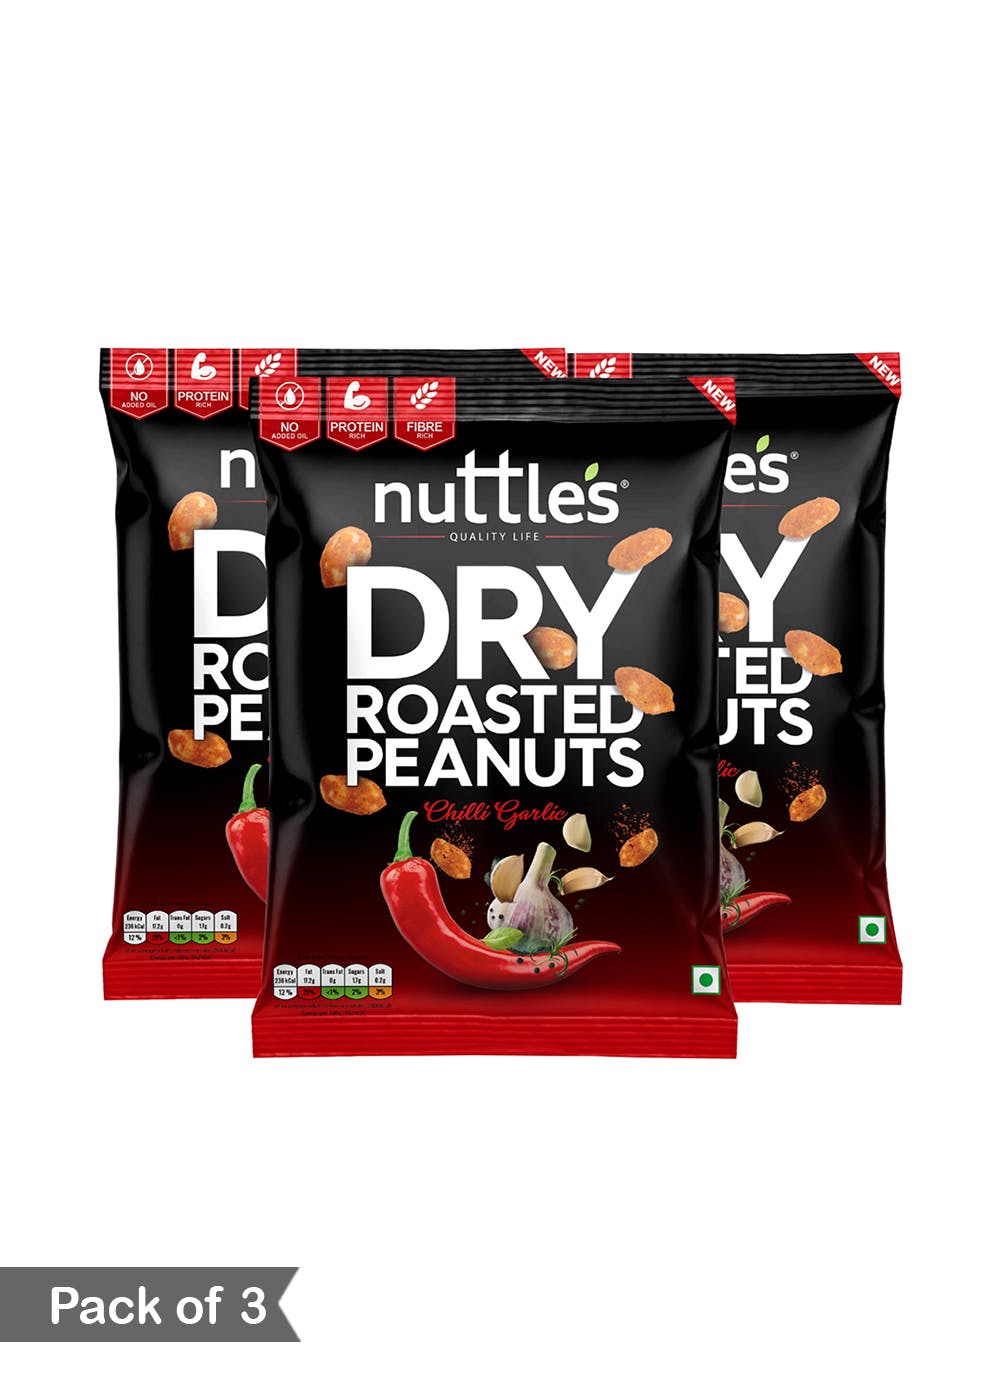  Premium Flavored Dry Roasted Peanuts -  Flavor : Chili Garlic-  Pack of 3 (135g Each)